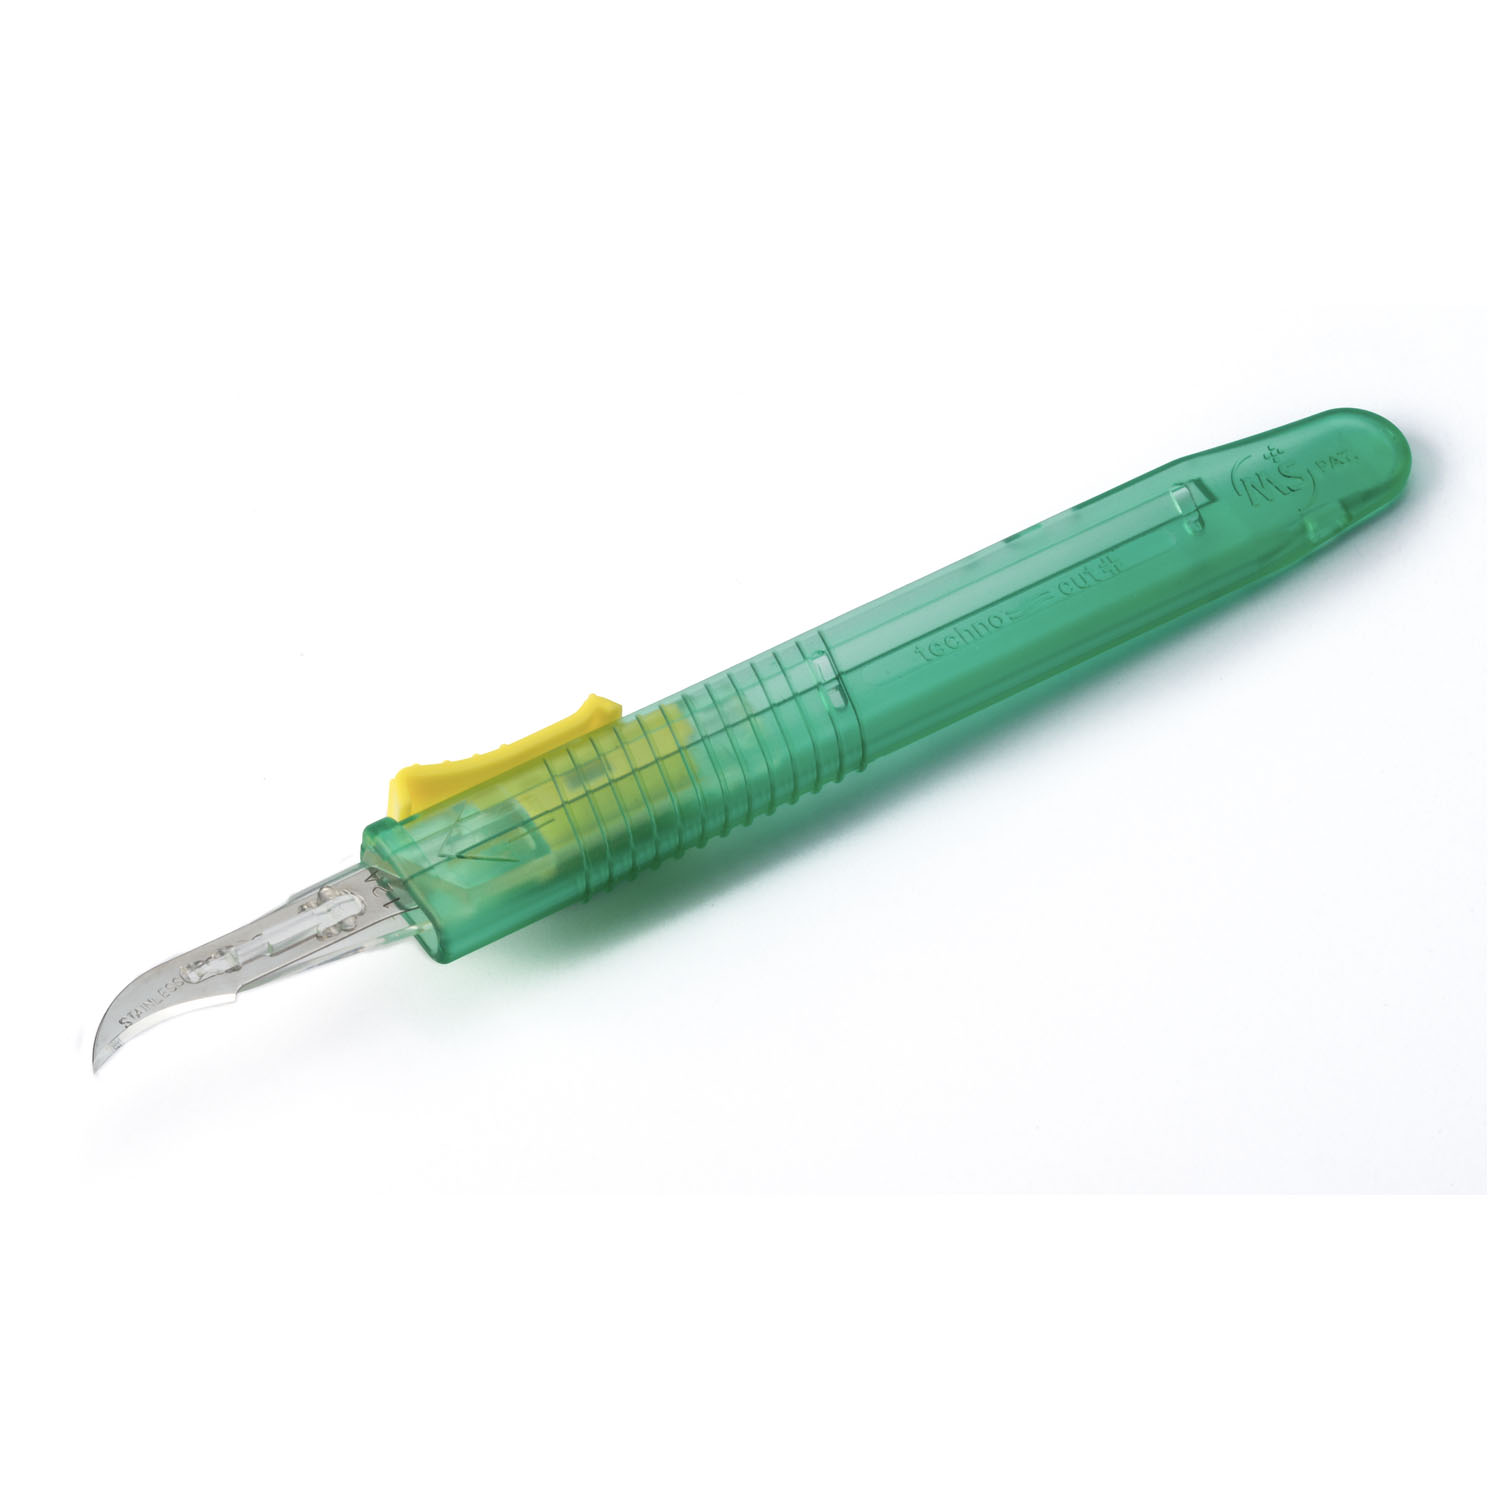 MYCO DISPOSABLE RELI-CUT SAFETY SCALPELS : 6008TR-12 BX $13.40 Stocked